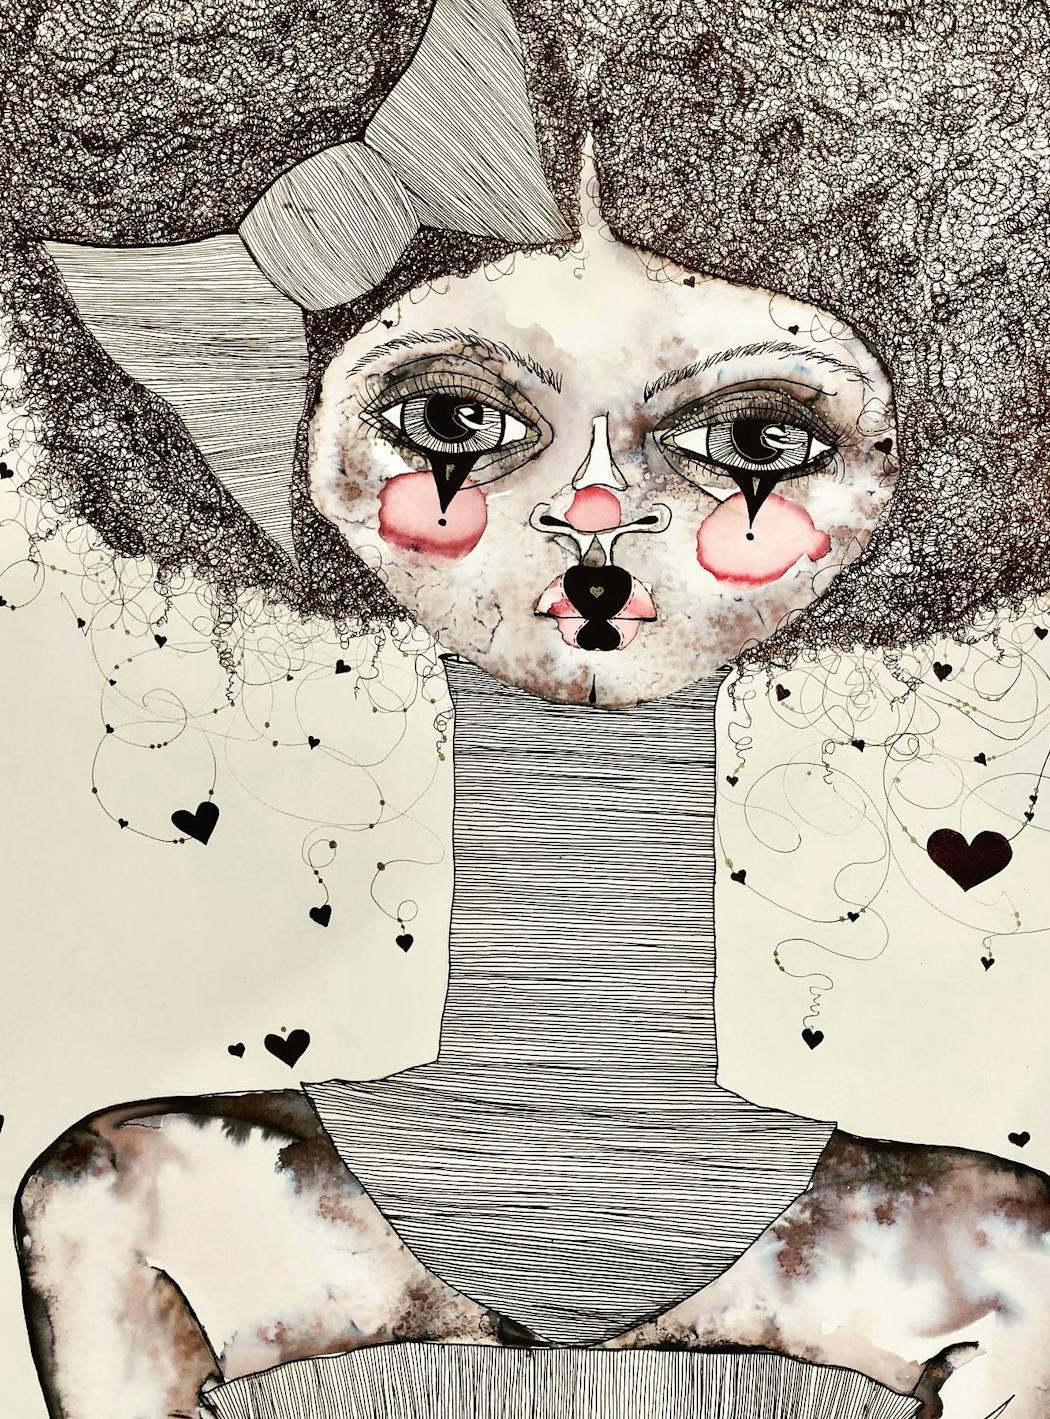 “Sad Clown” watercolor and ink on cotton cold press by Arianne Zager.